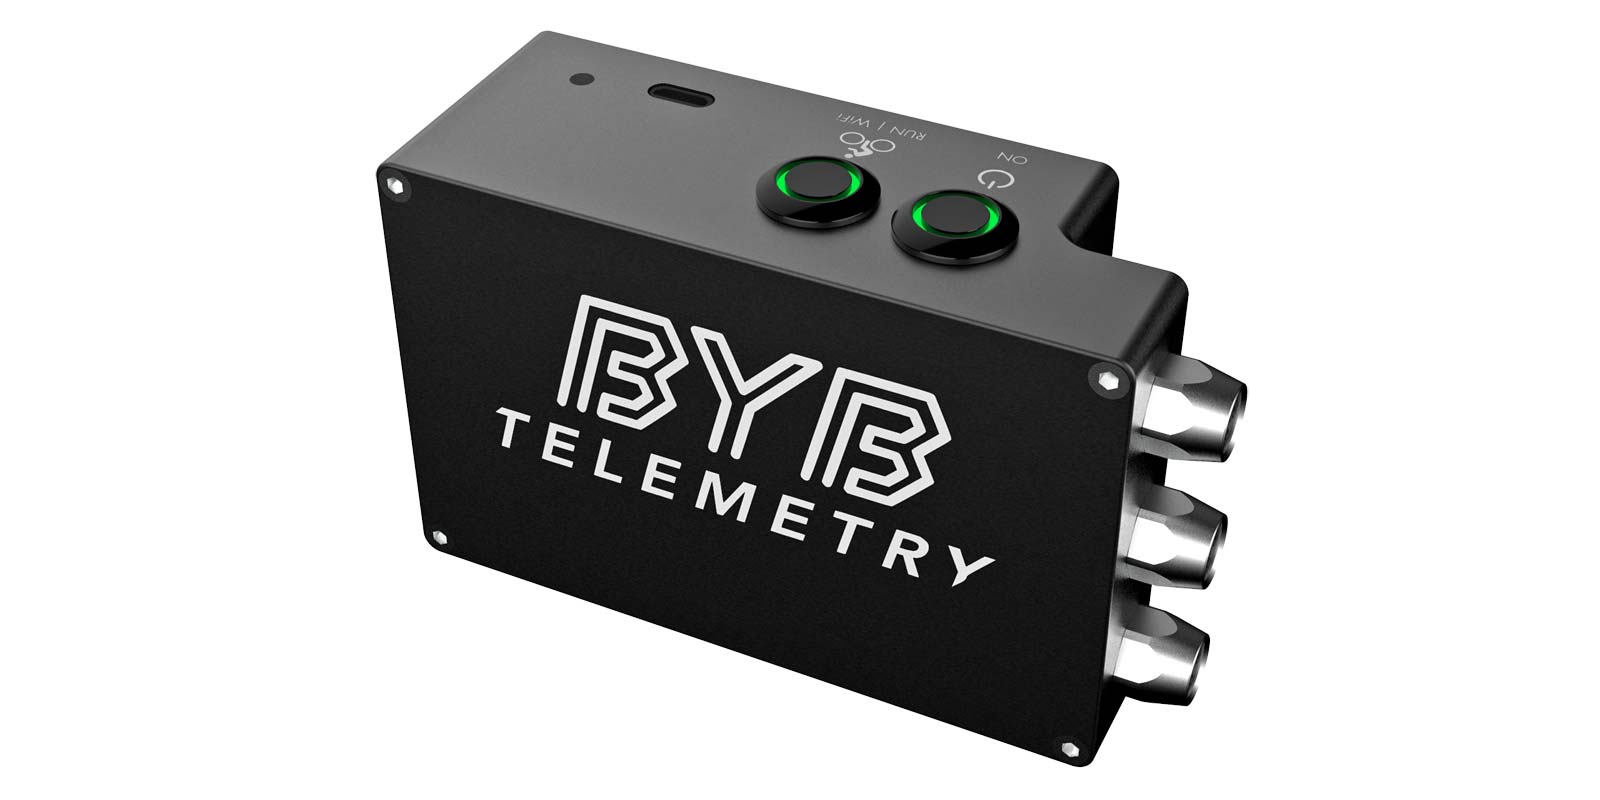 BYB Telemetry v2.0 pro MTB suspension analysis for the privateer mountain bike racer, CPU head unit